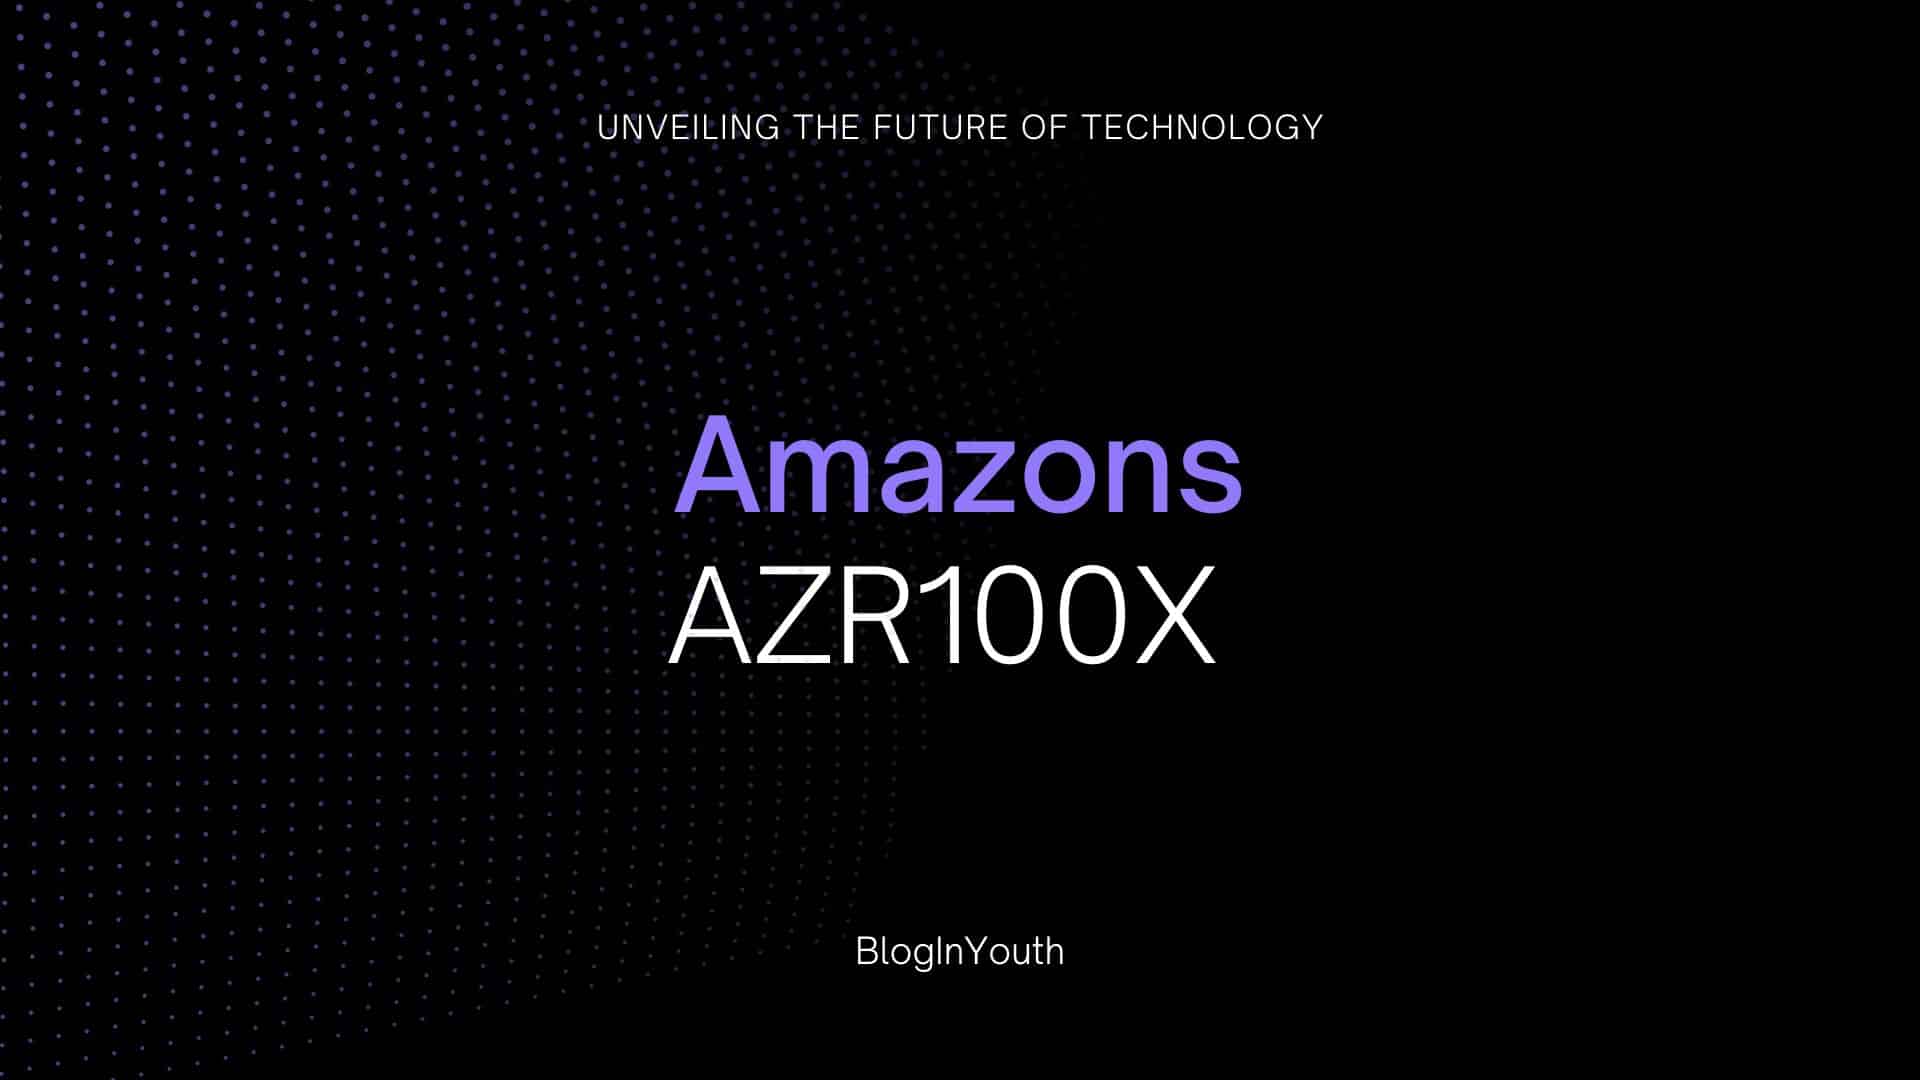 Amazons AZR100X: Unveiling the future of technology